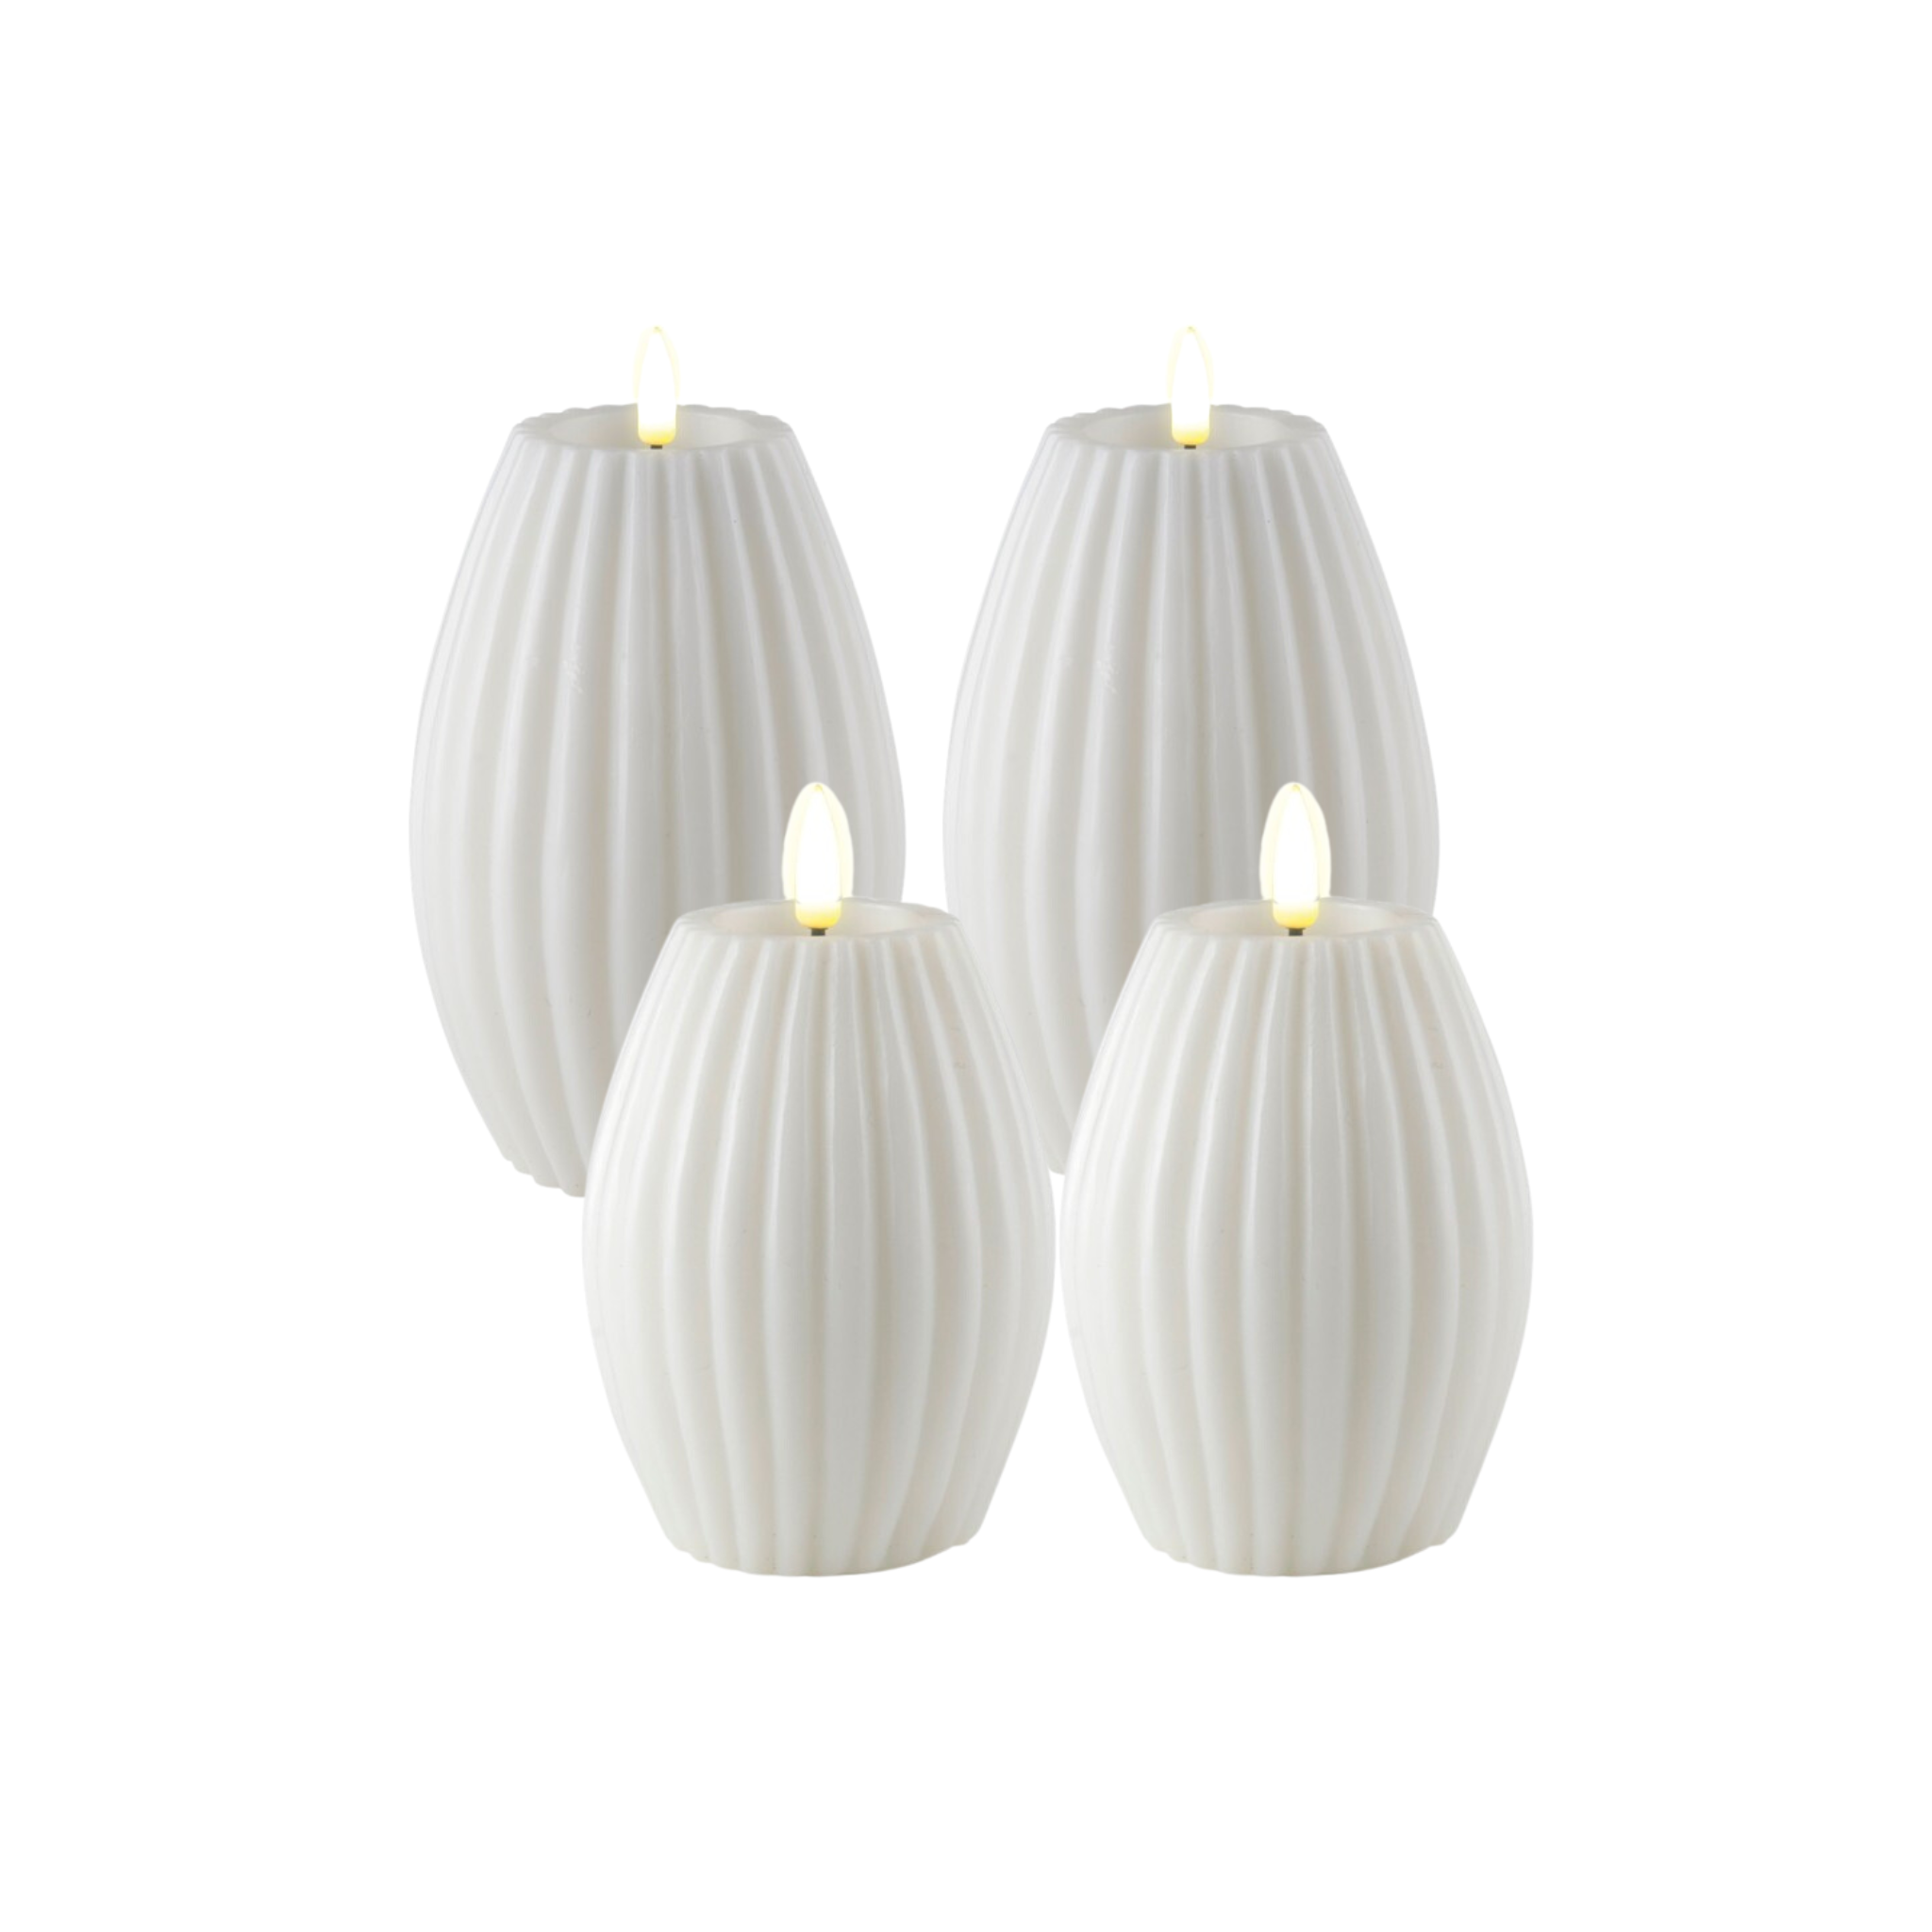 Deluxe Homeart LED candle set indoor oval white